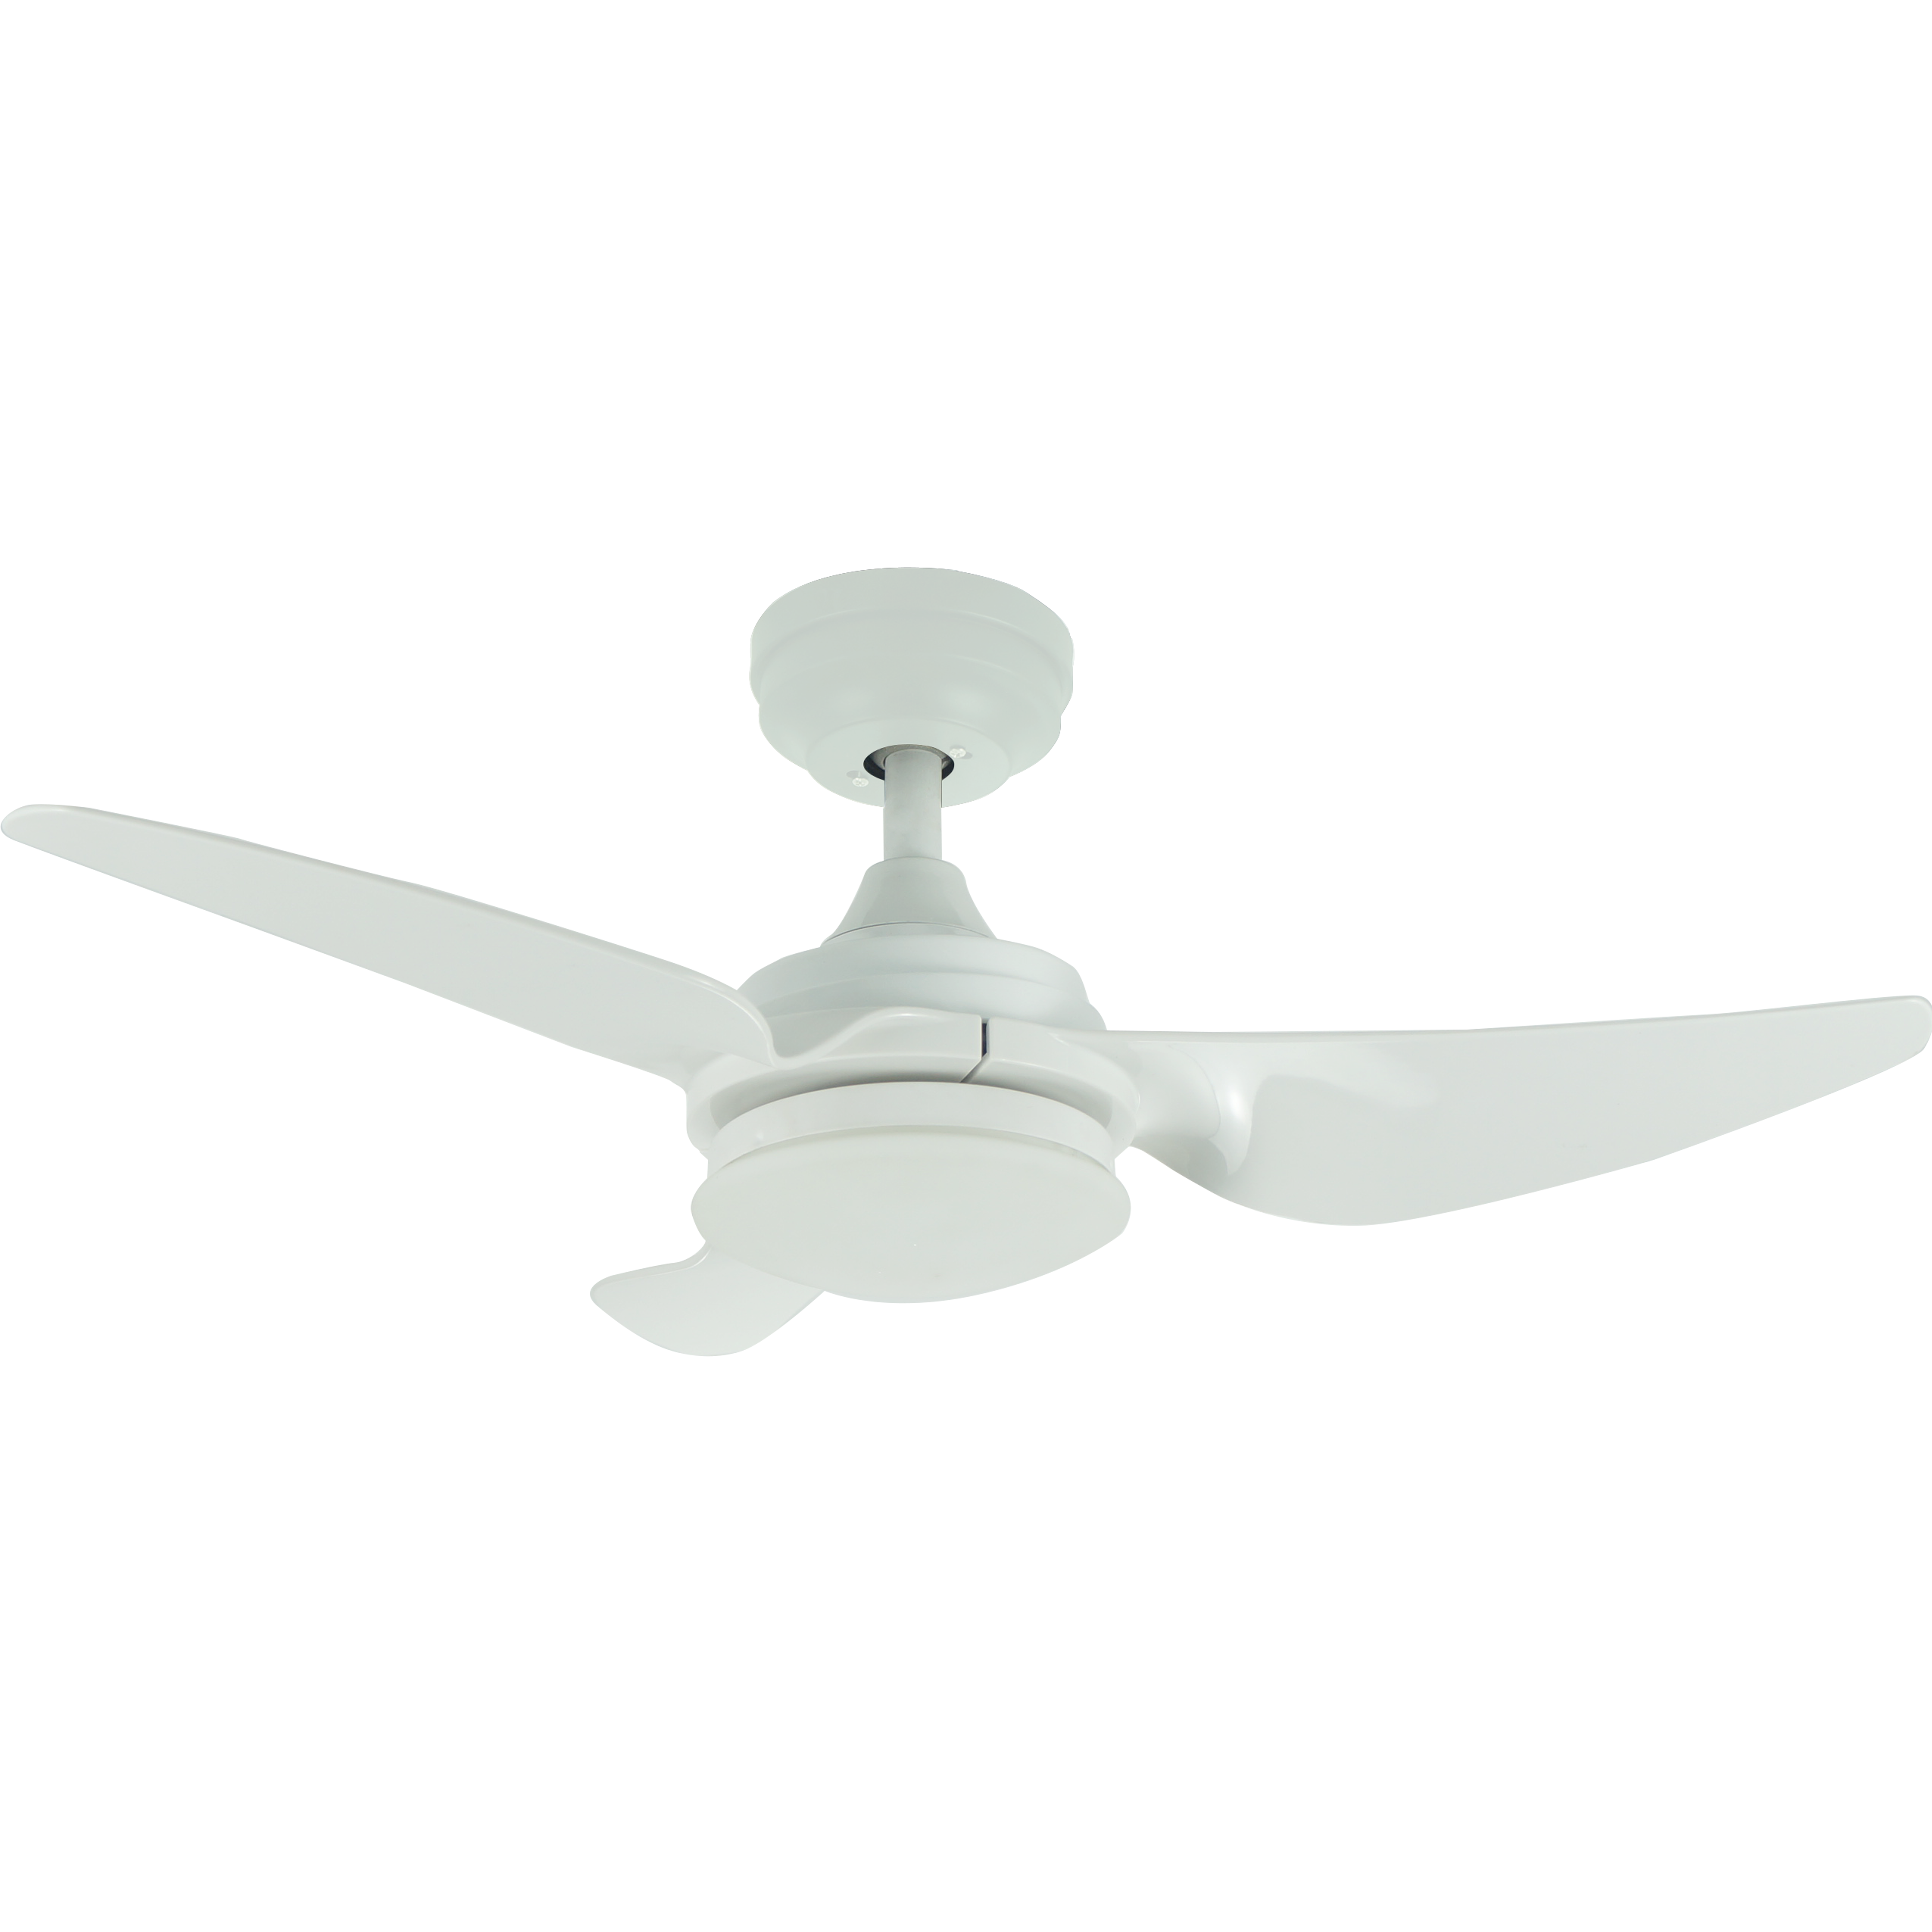 AirBena Modern Small Size Series Waterproof Outdoor Ceiling Fan Home Appliances Electric Domestic Ceiling Fan with LED Light